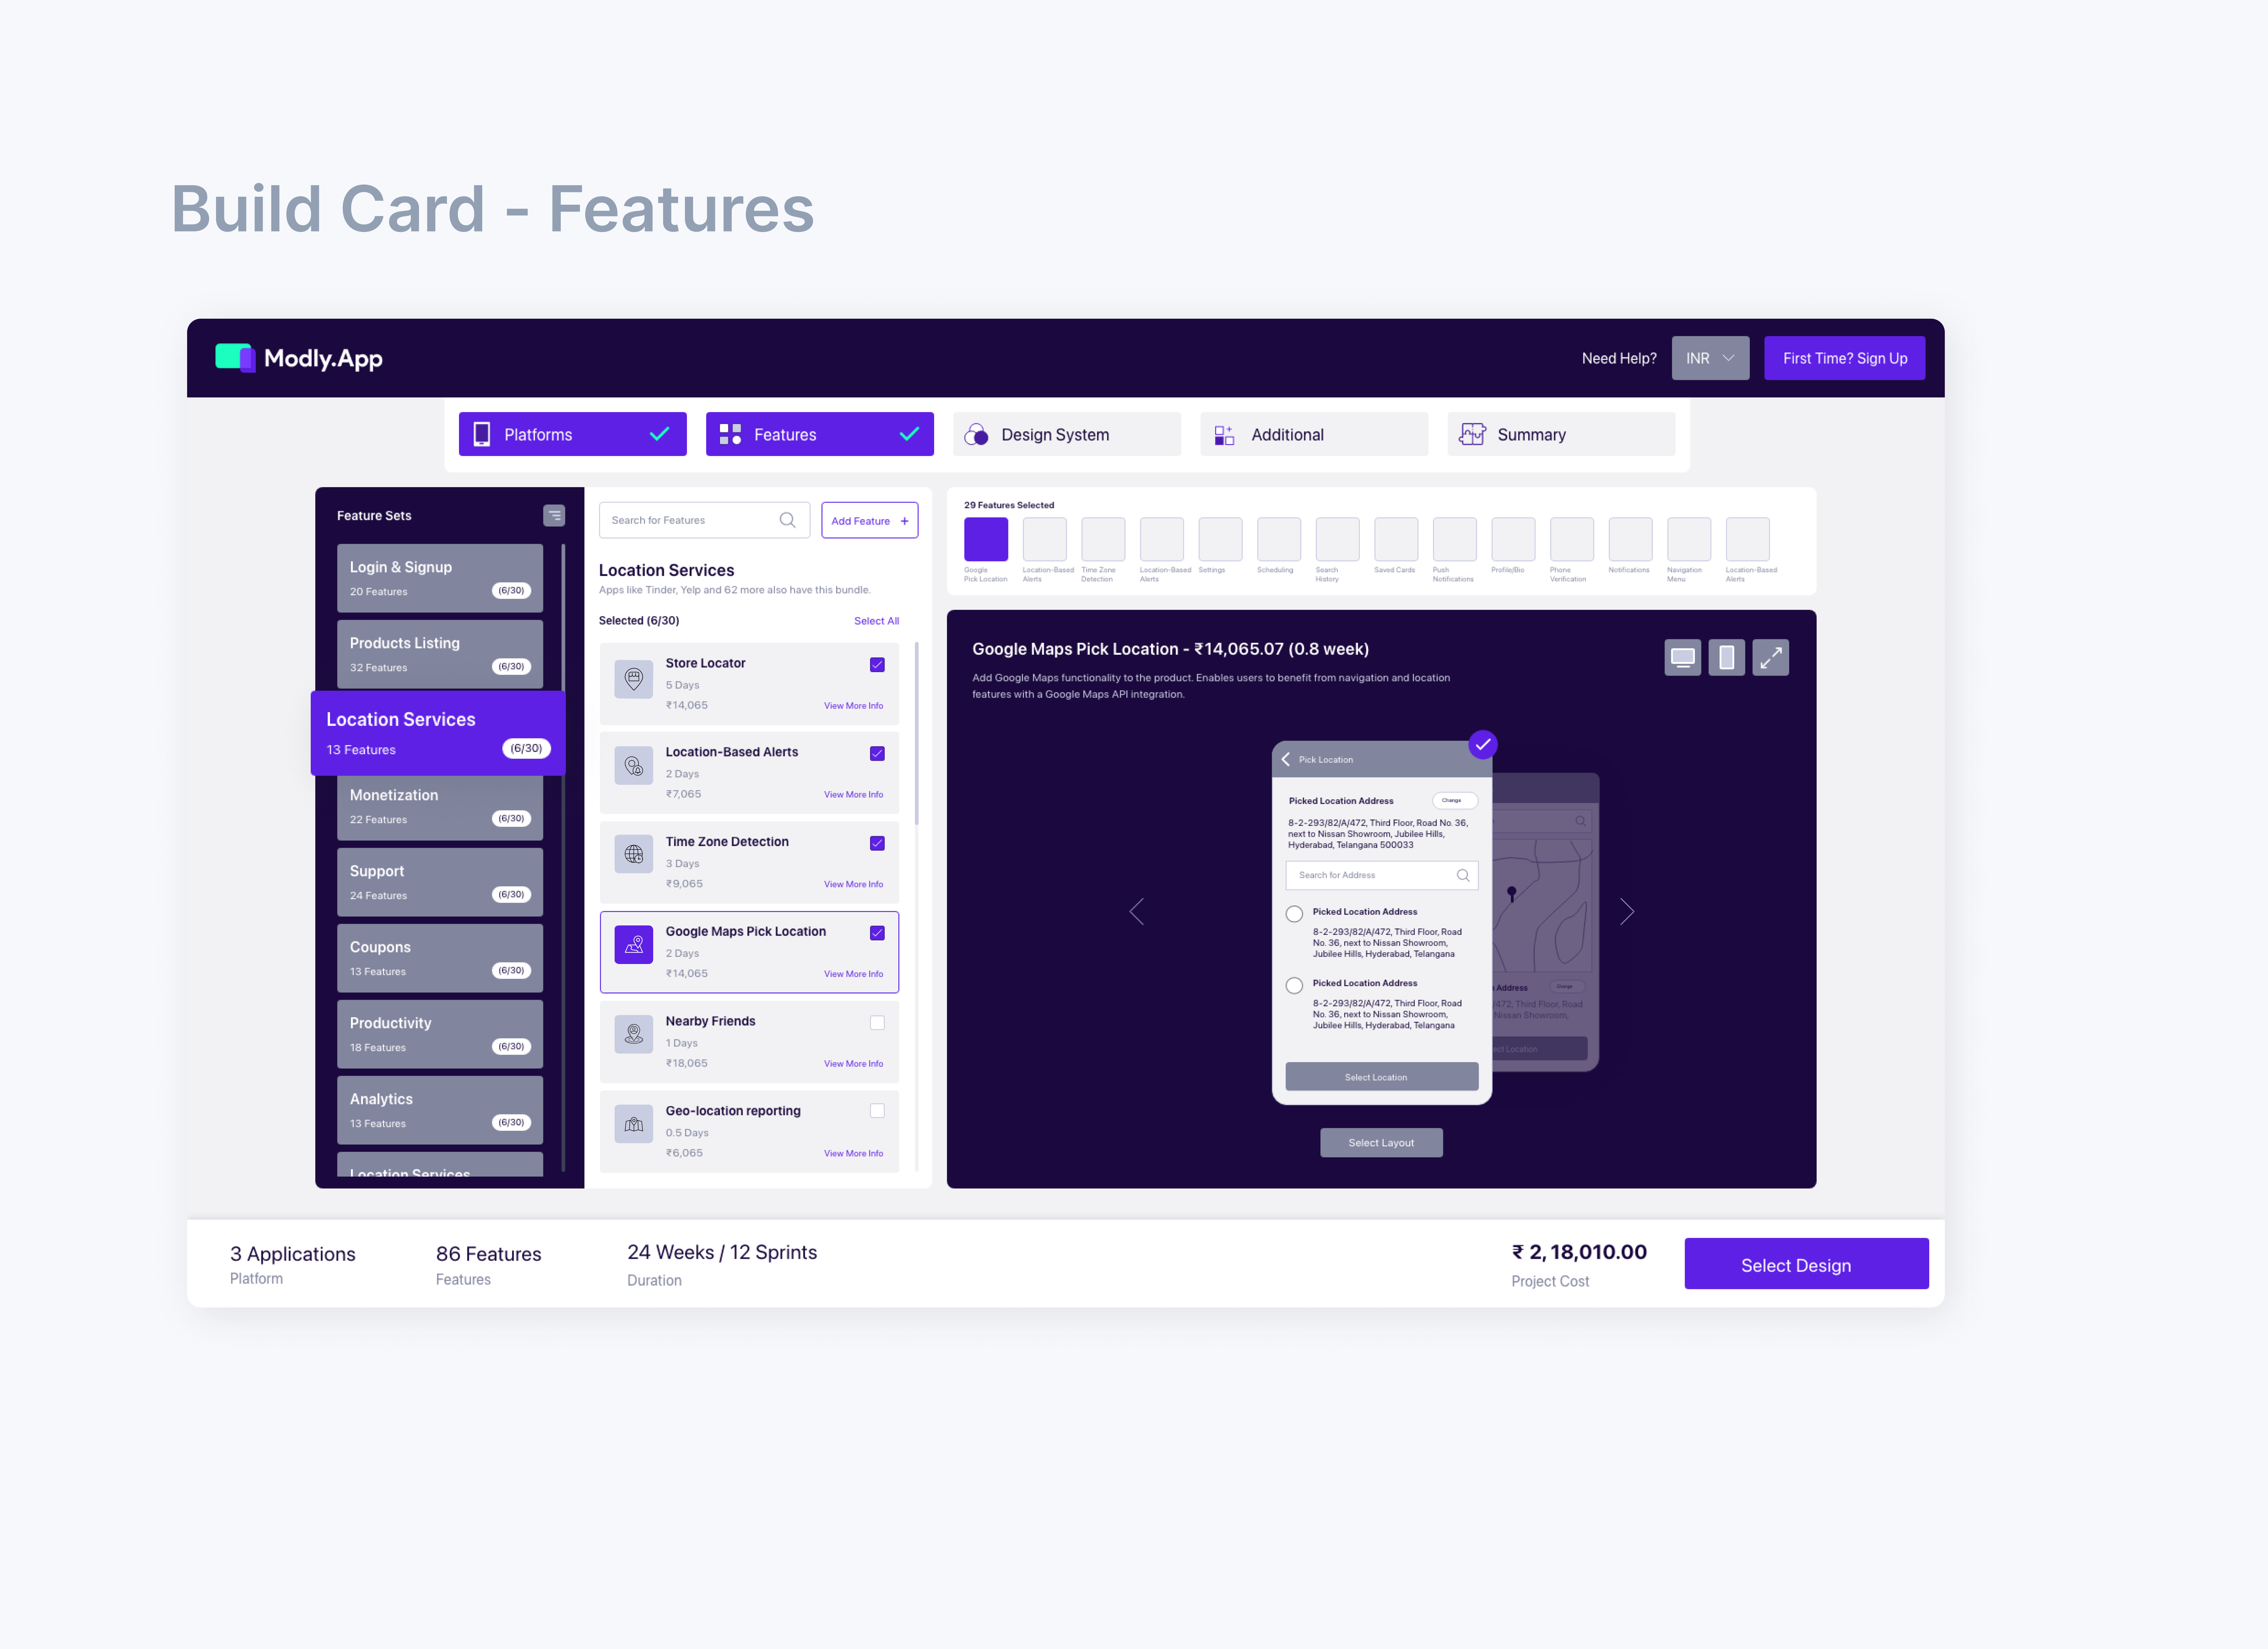 6.Build-Card-Features